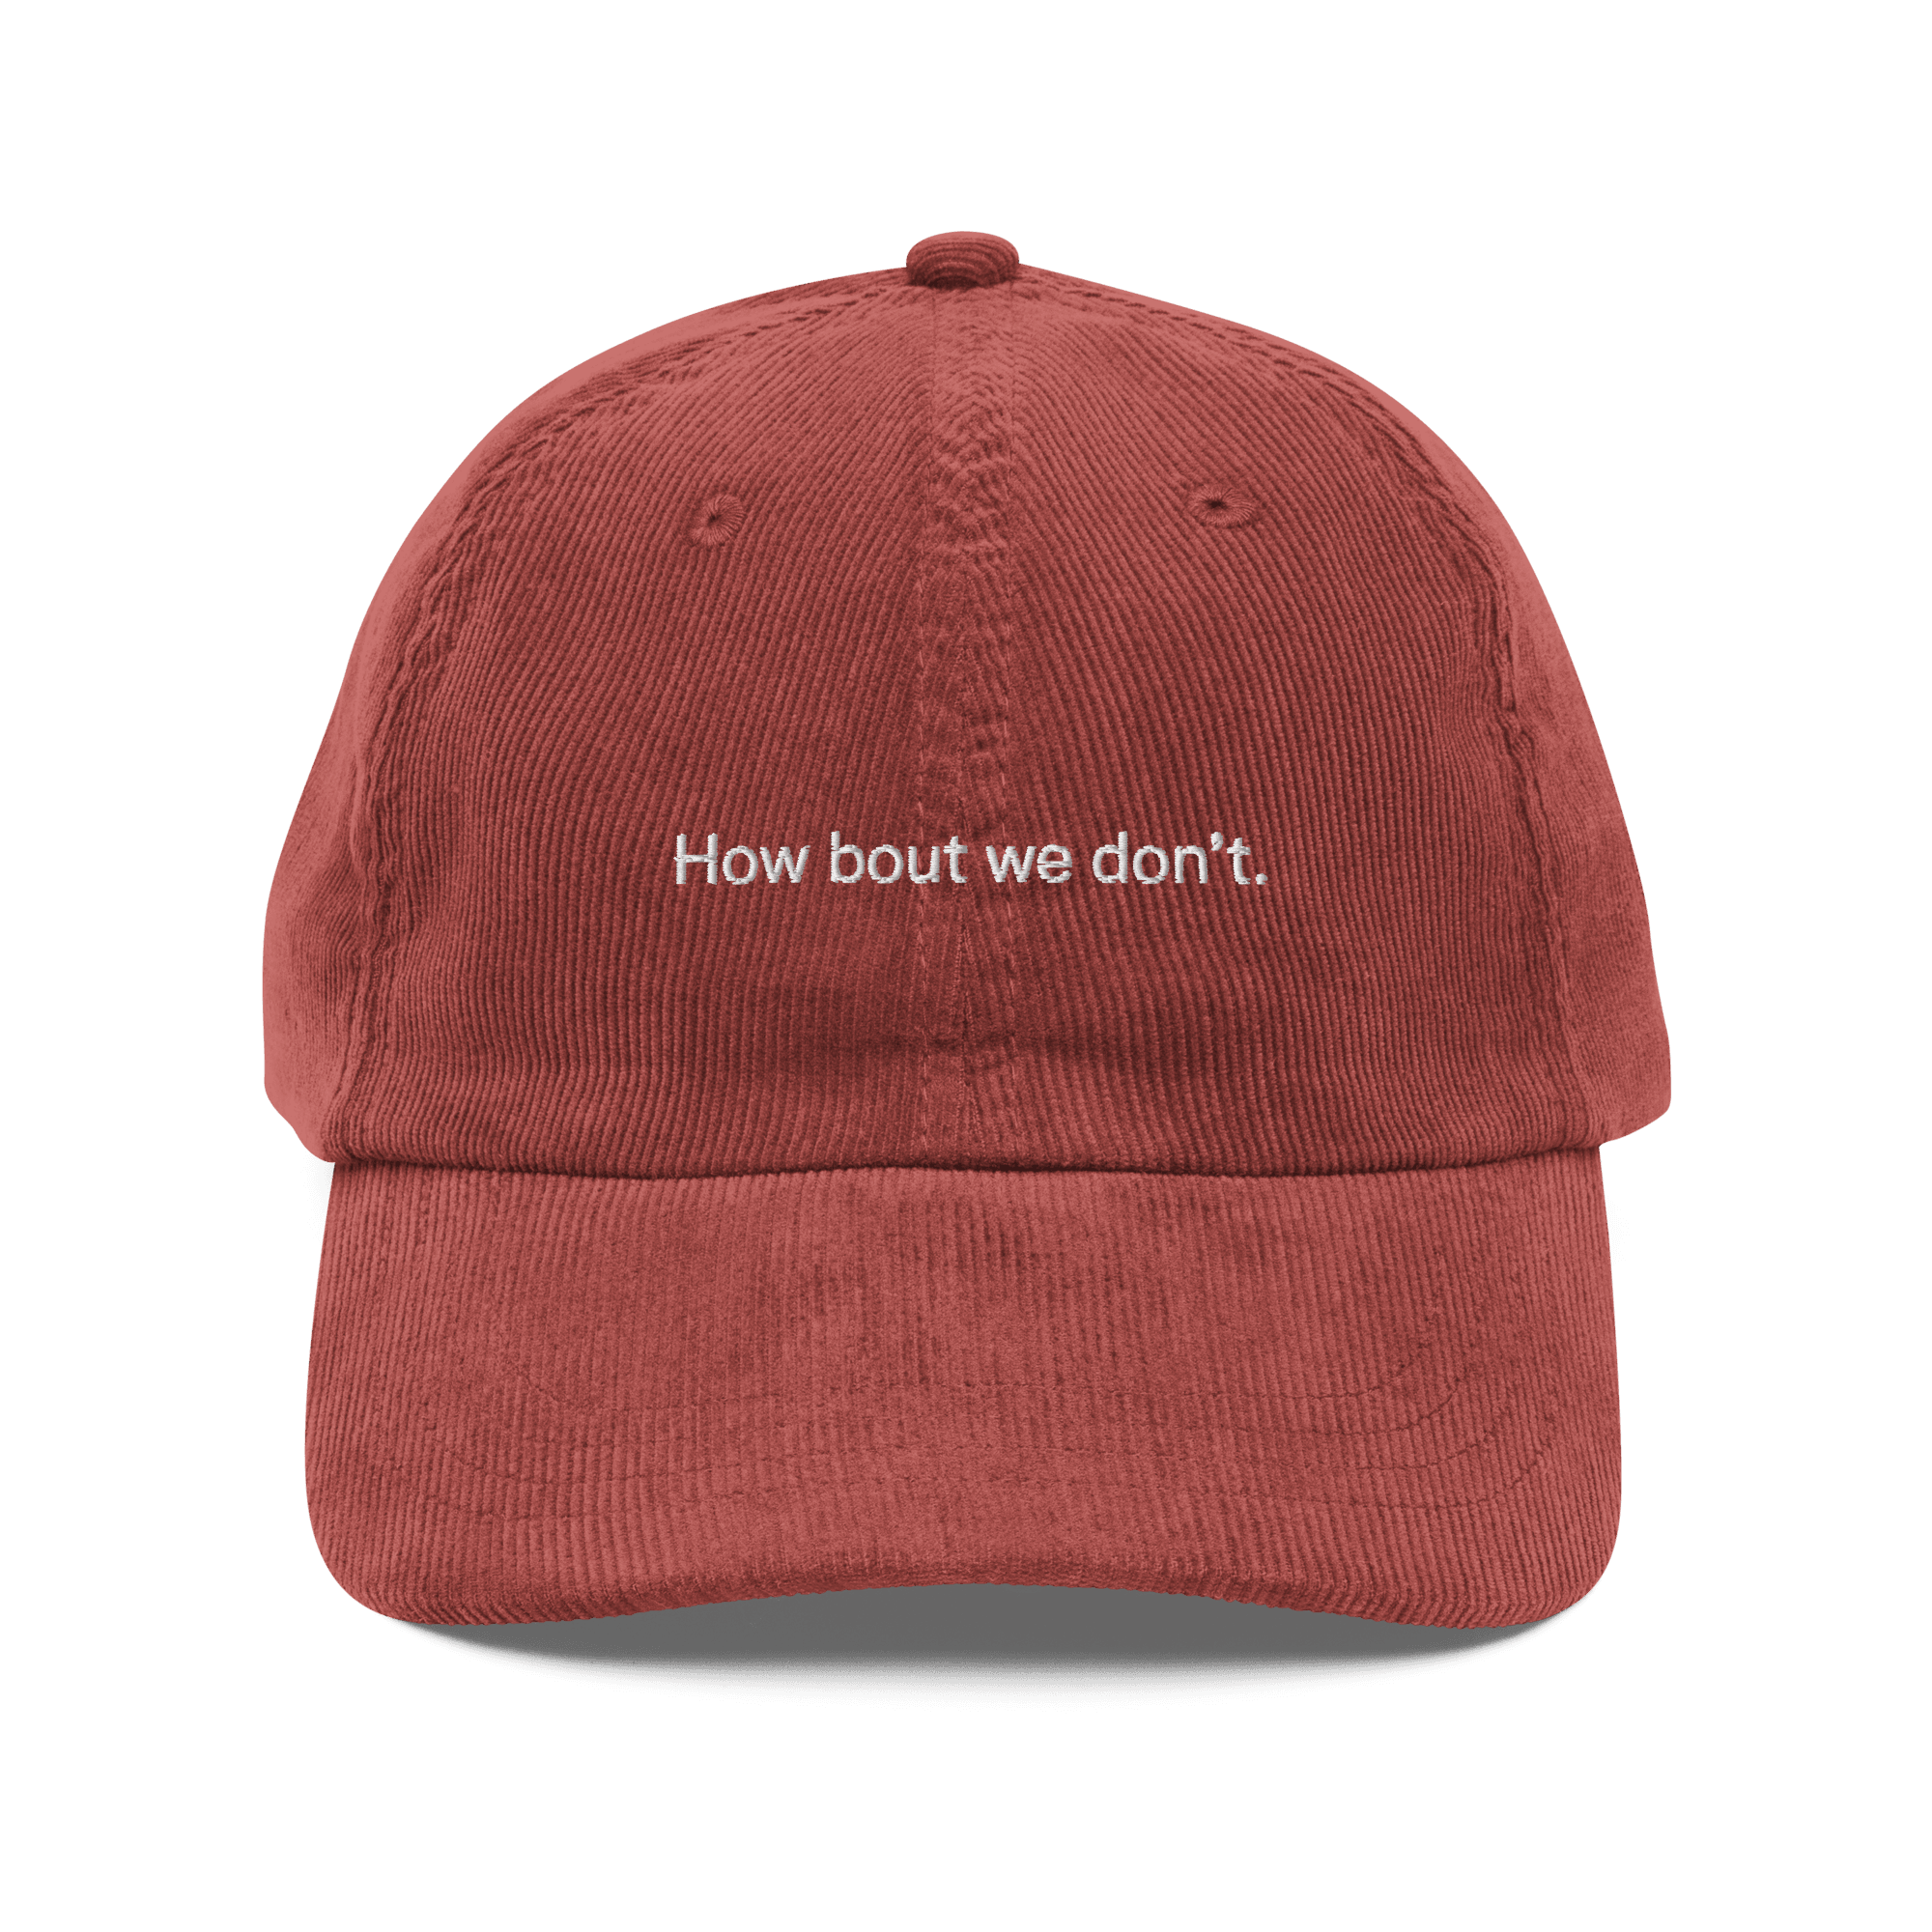 How bout we don't. Embroidered Corduroy Hat Polychrome Goods 🍊